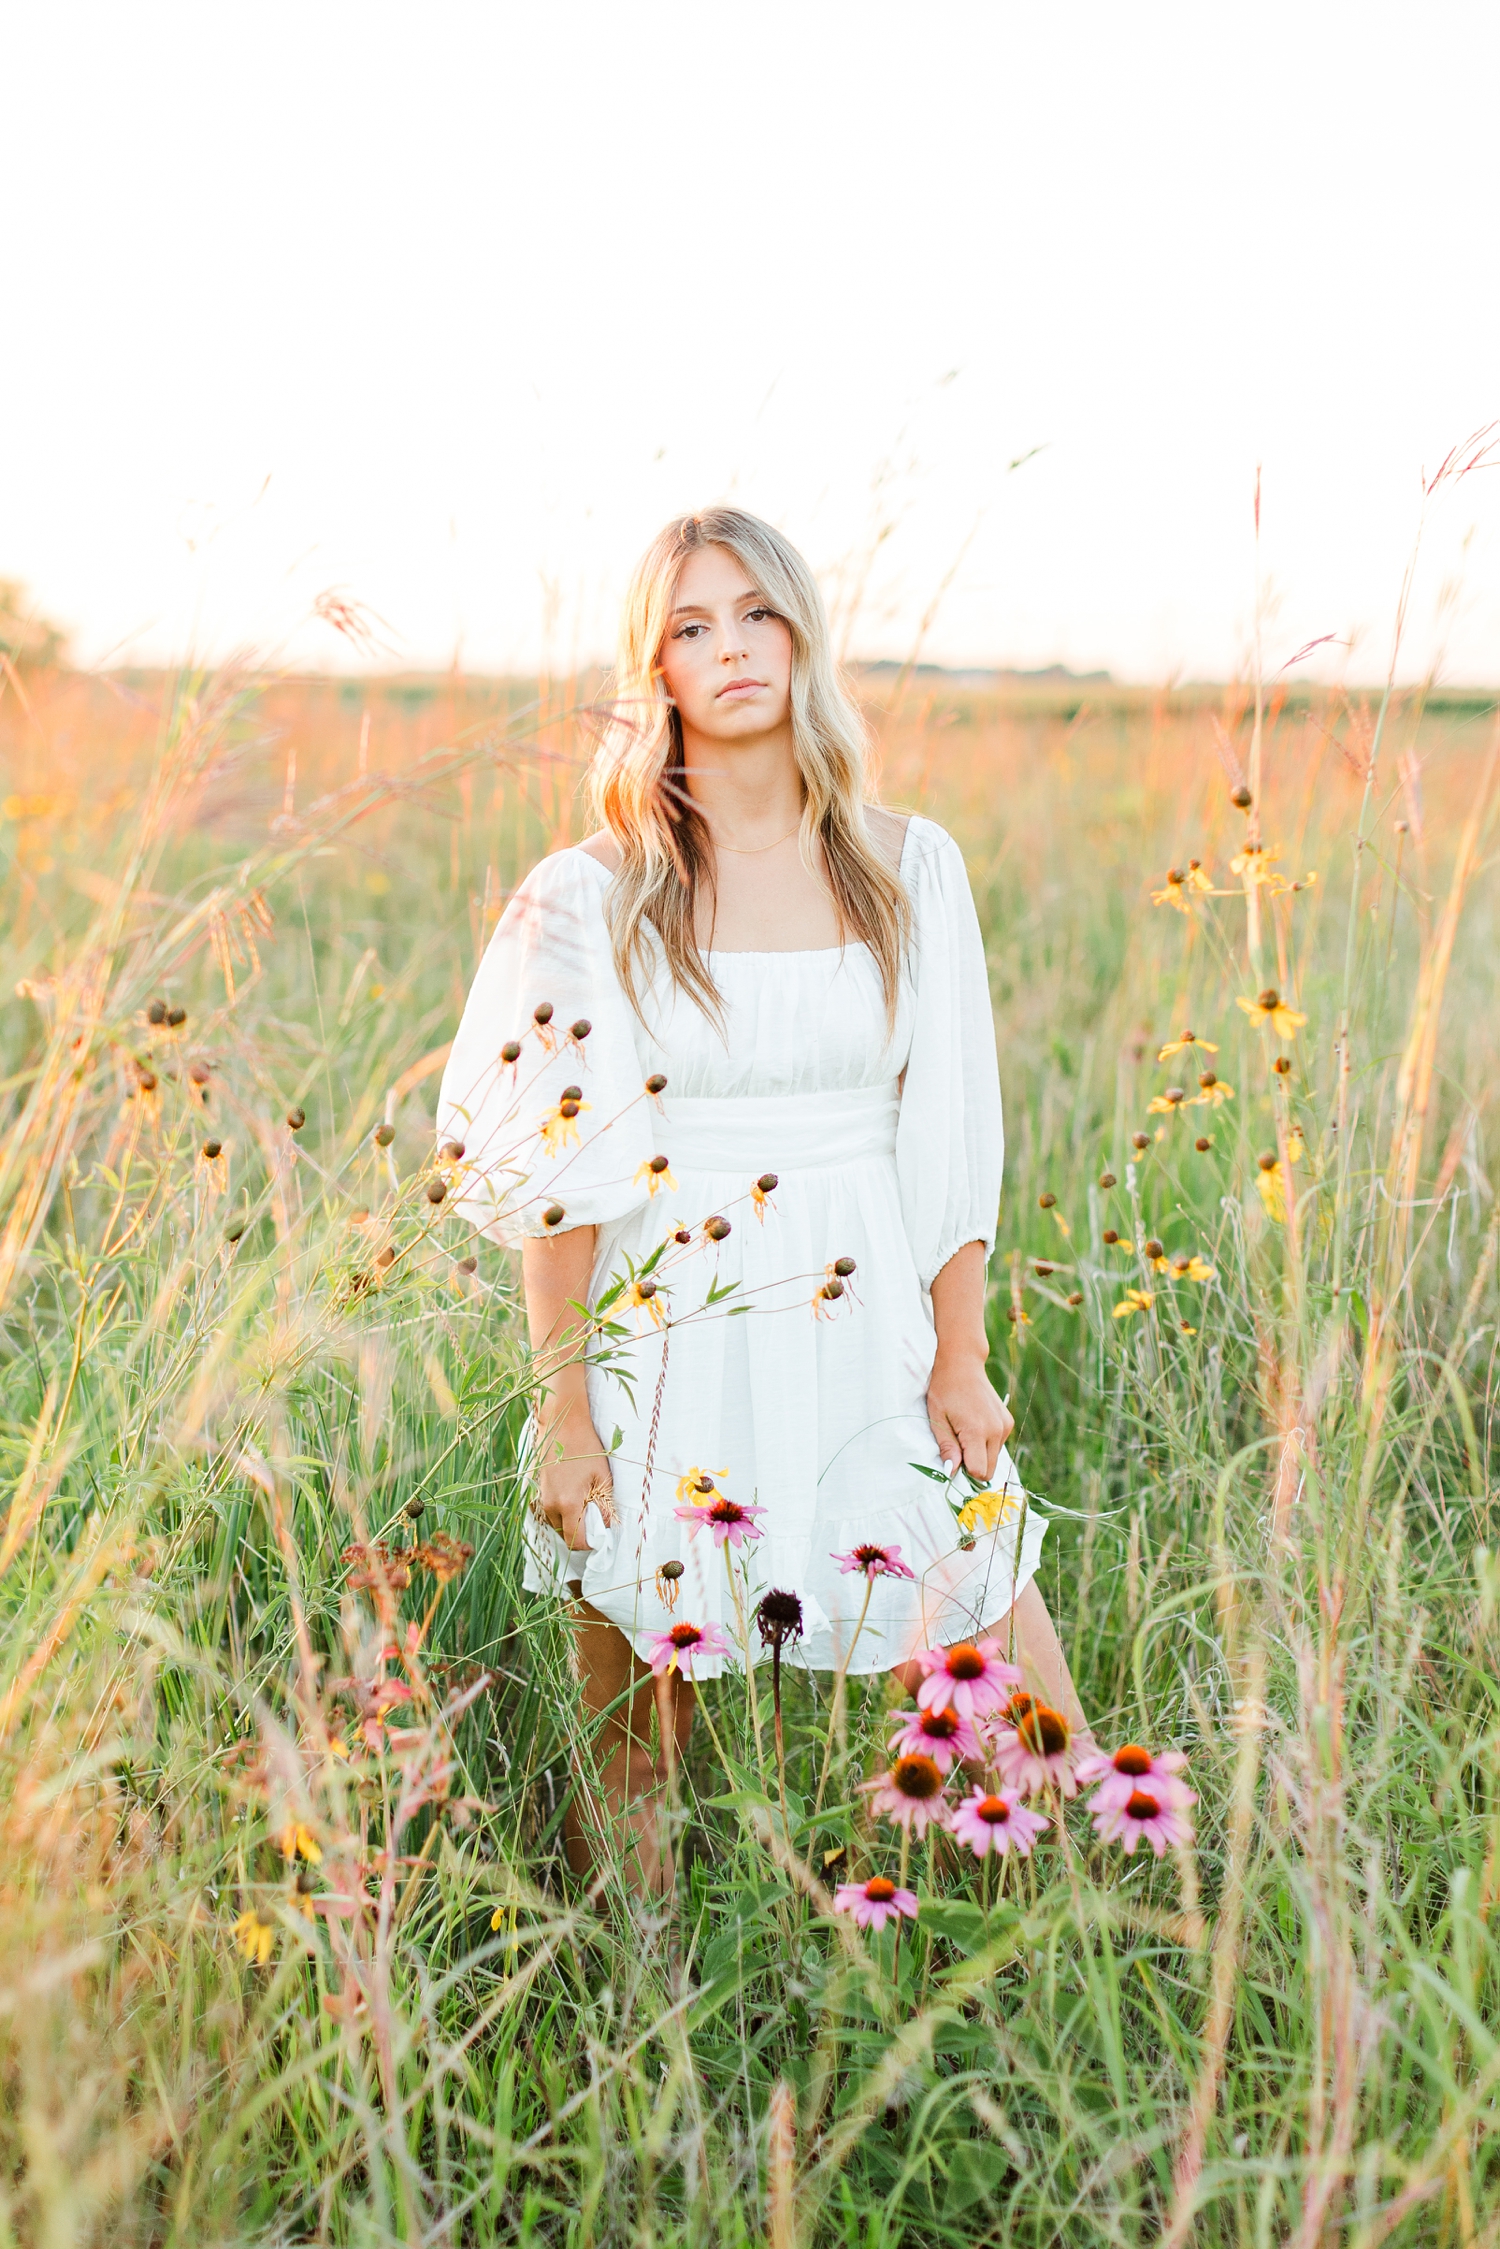 Eden stands in a wildflower field at golden hour wearing a white dress | CB Studio